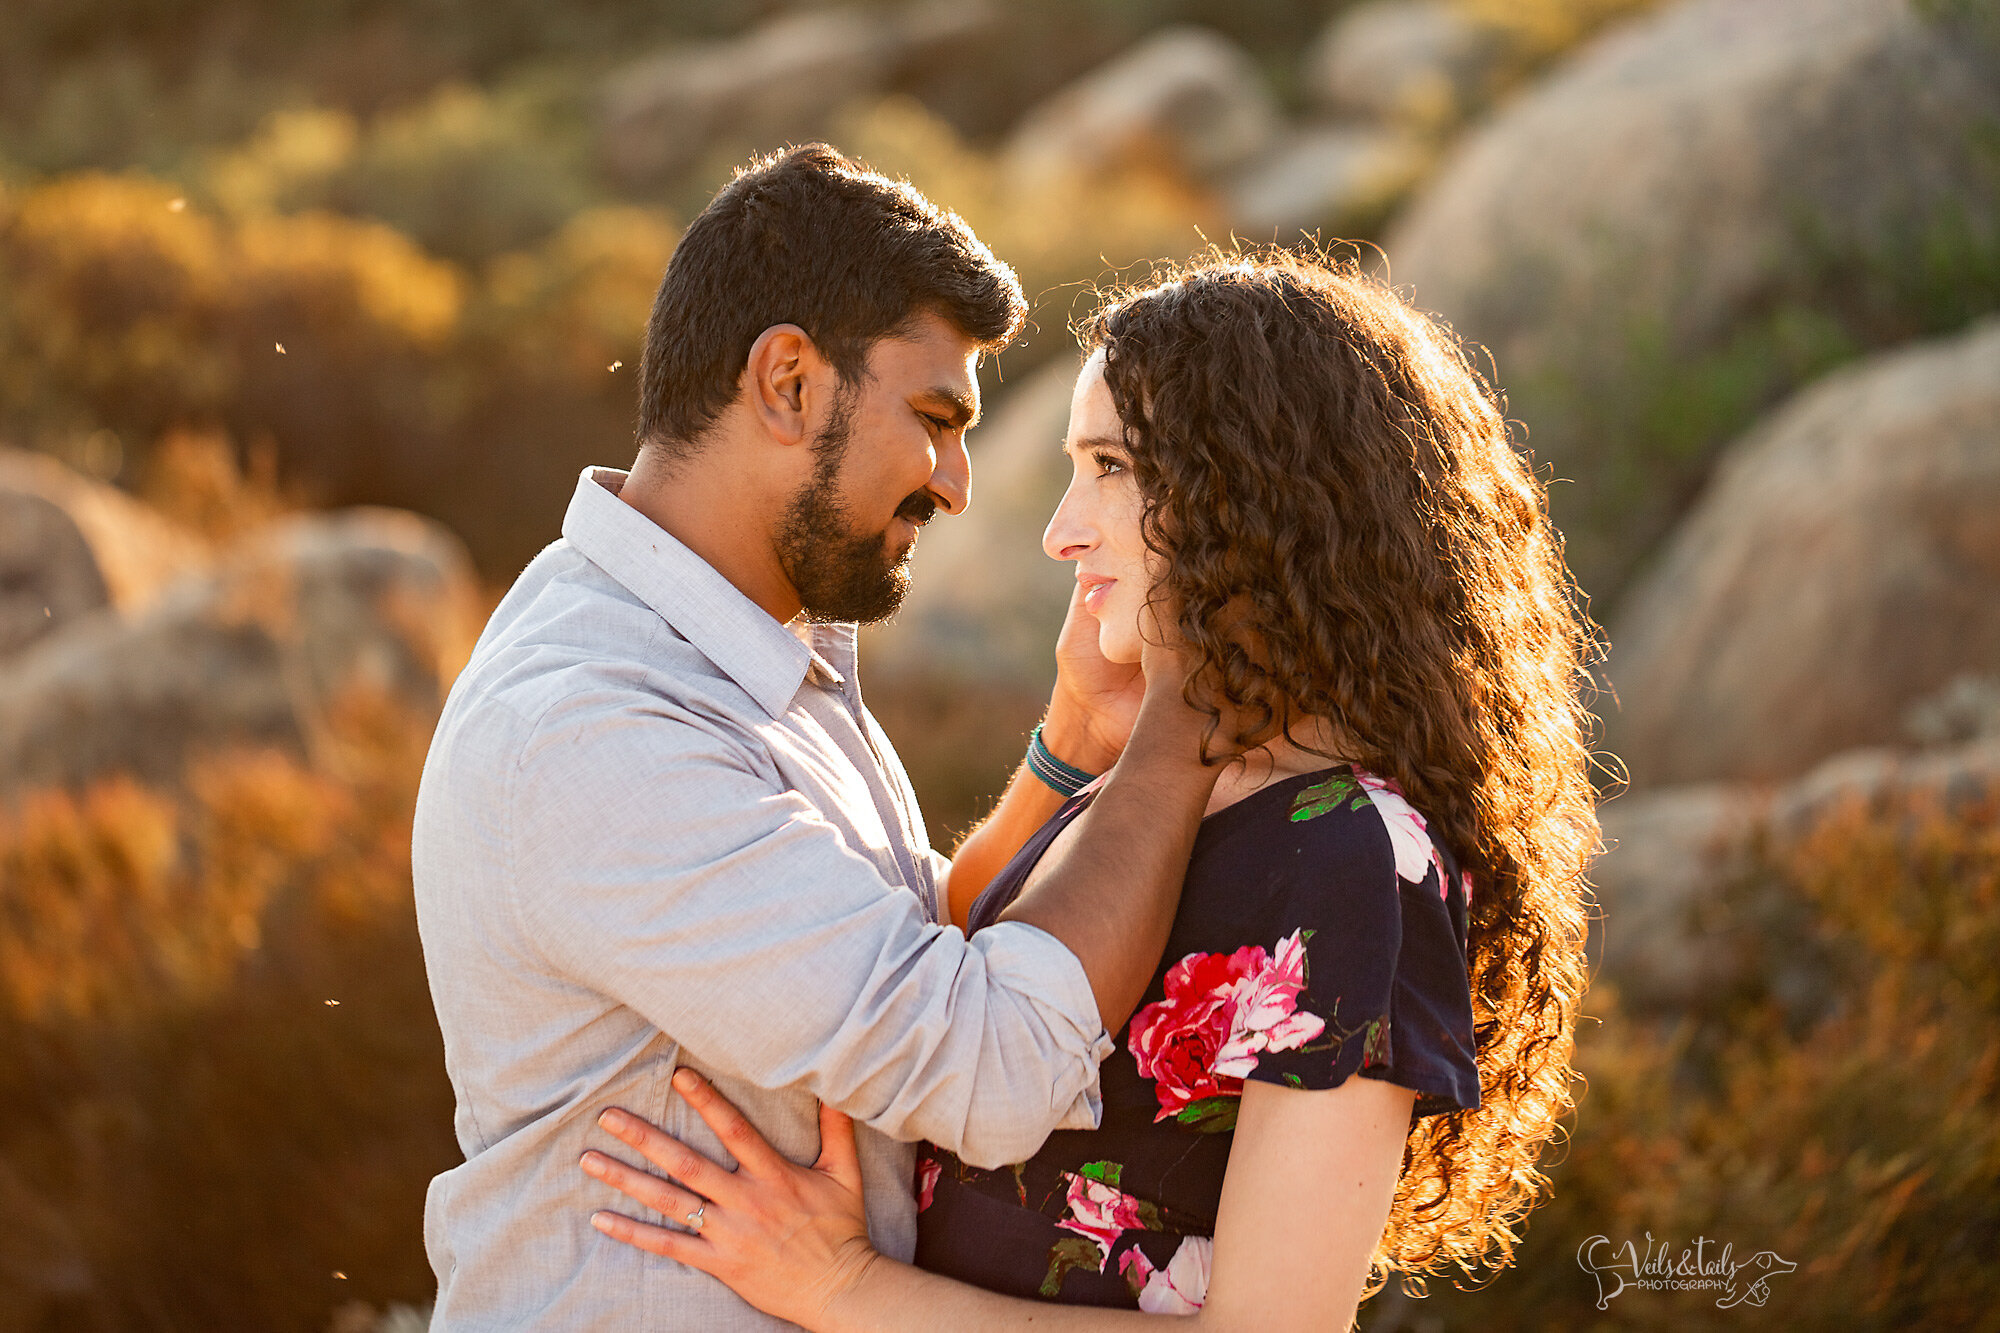 sunset engagement session at Lizard's Mouth in Santa Barbara